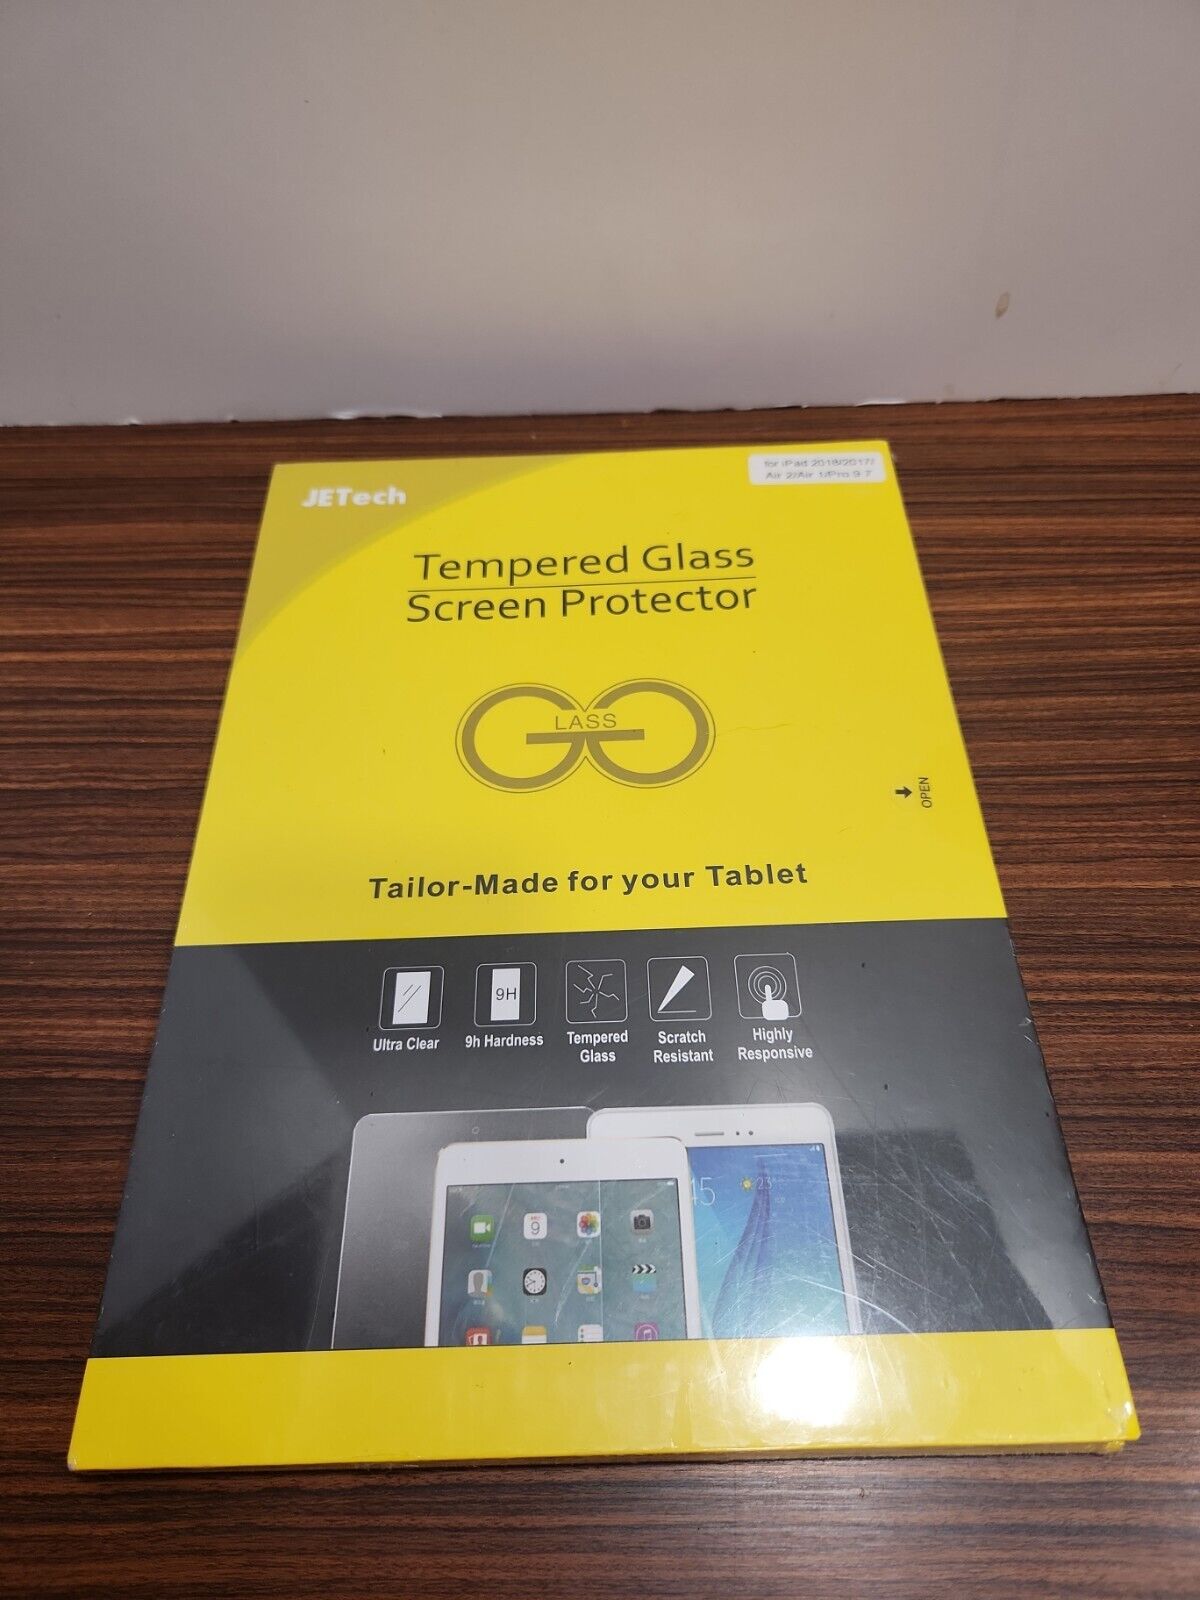 JETech One Touch Screen Protector for iPad 2017/2018 Air 2/Air 1/Pro 9.7